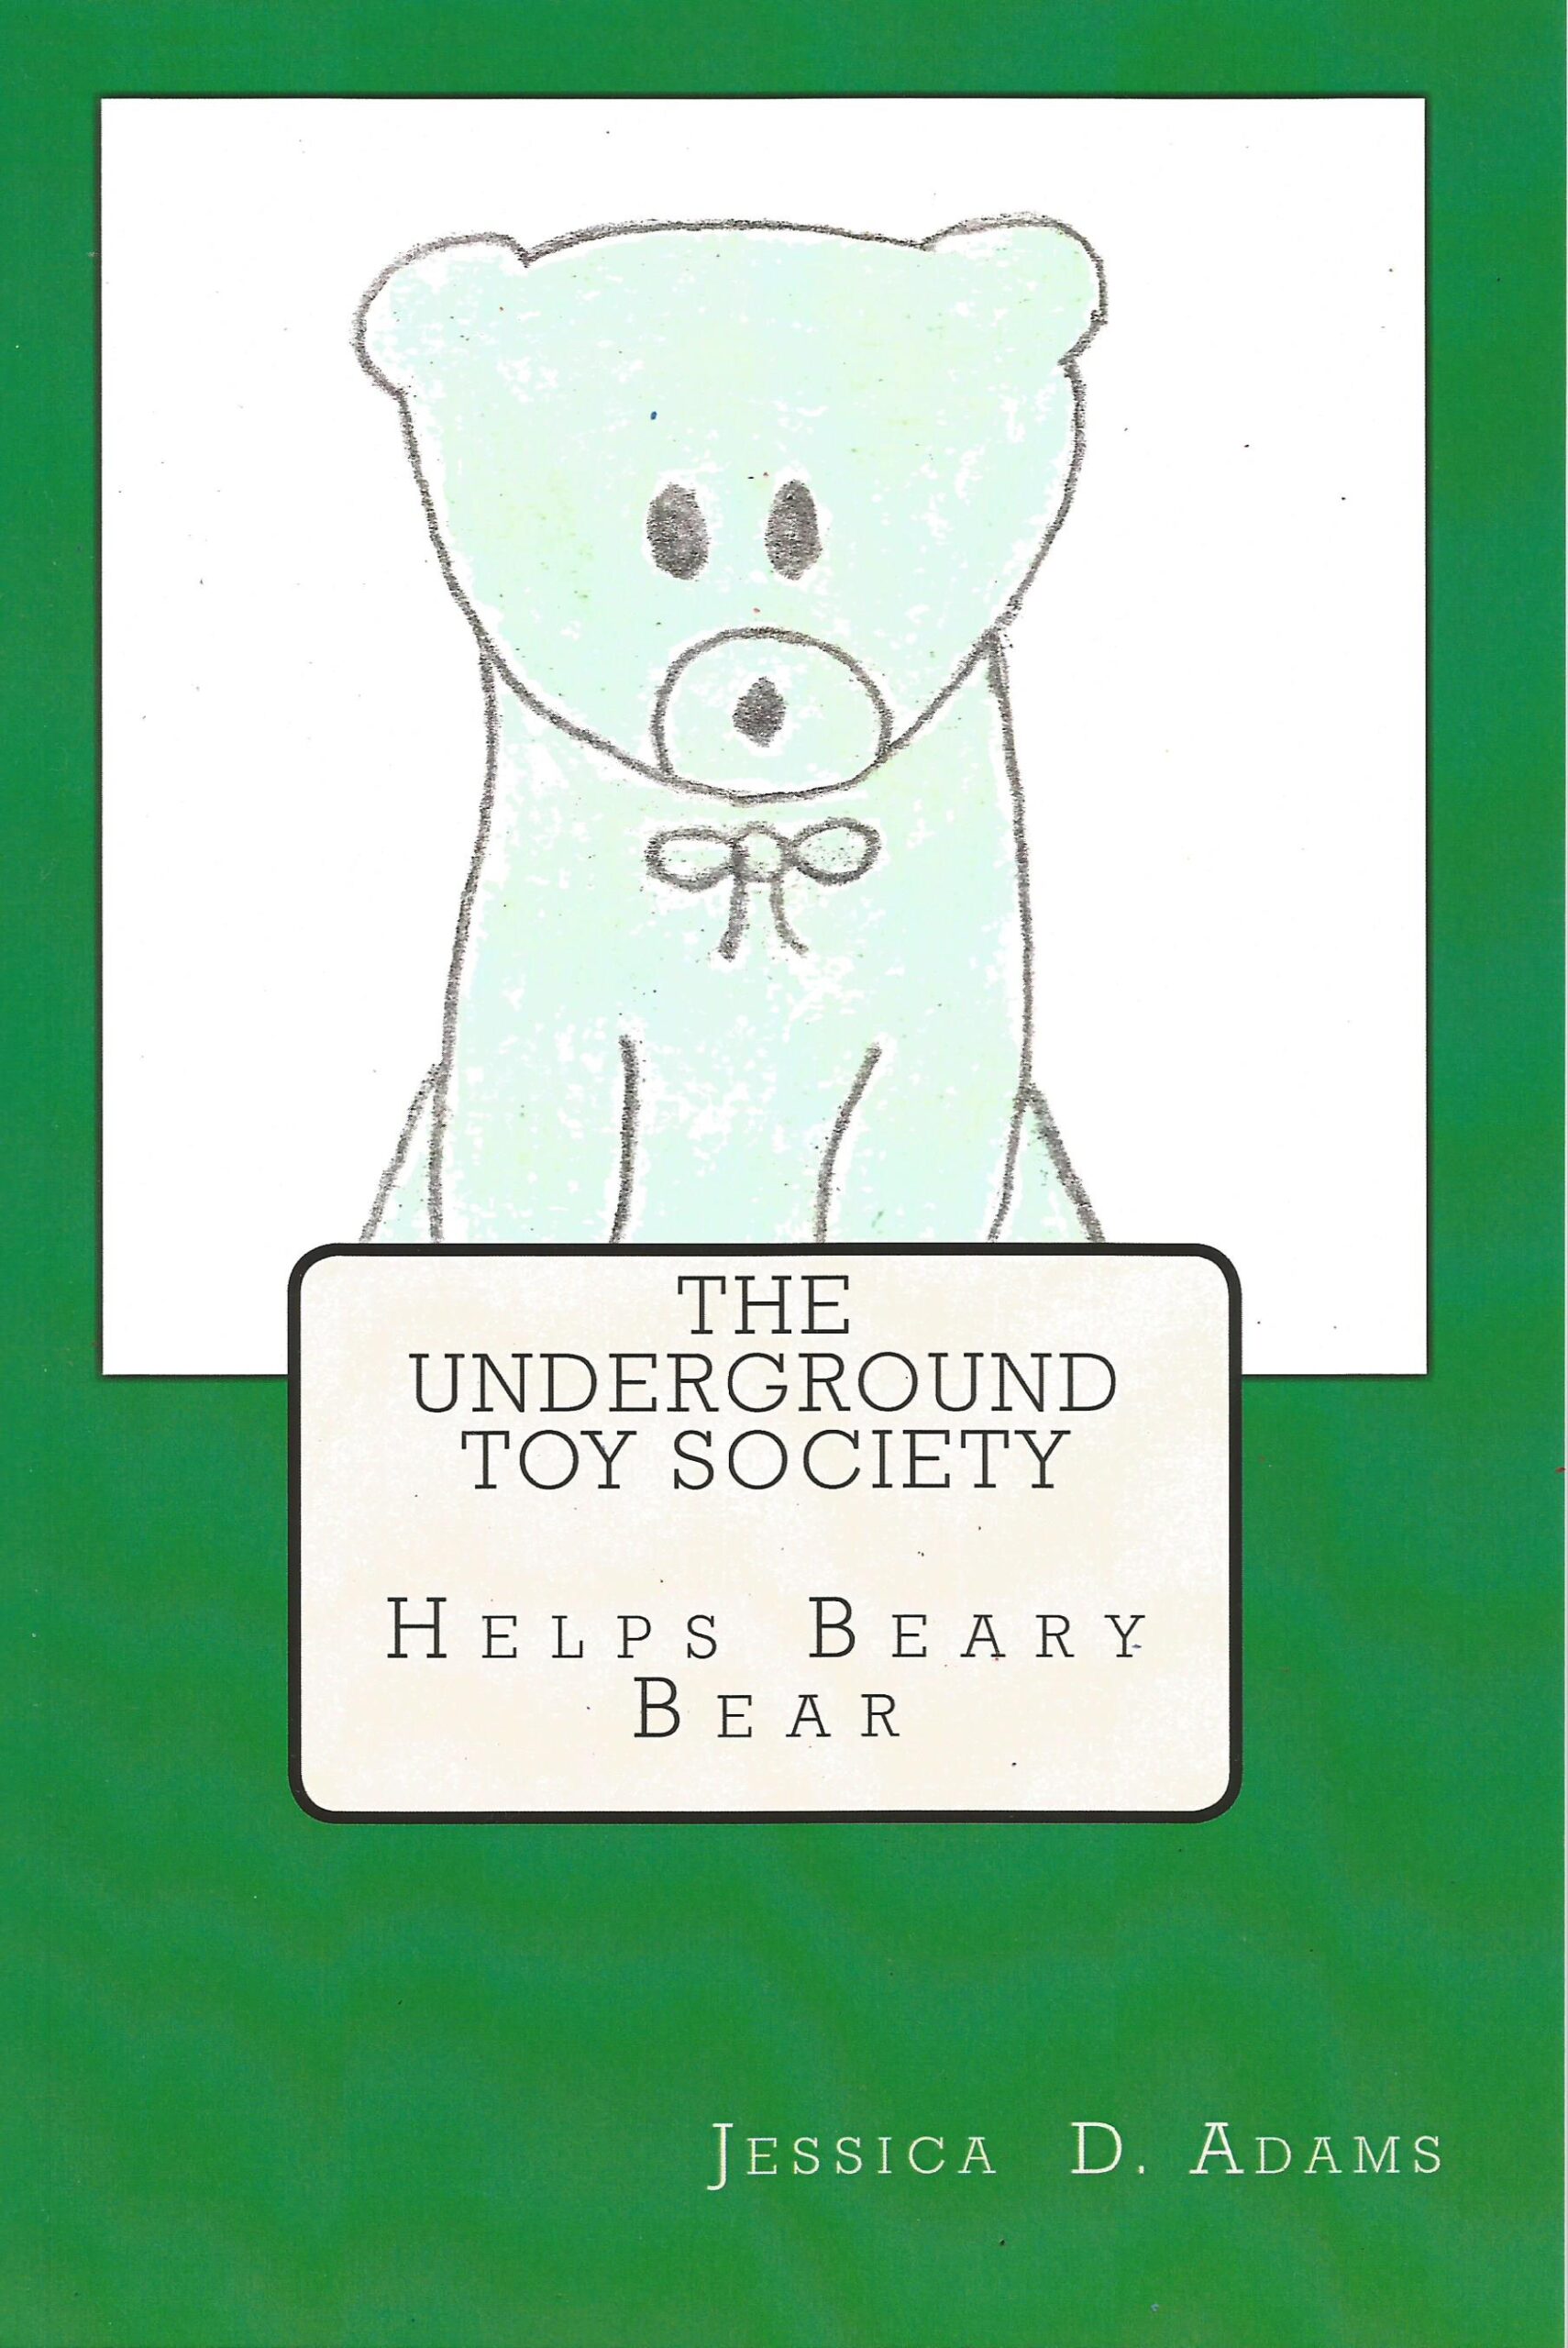 FREE: The Underground Toy Society Helps Beary Bear by Jessica D. Adams